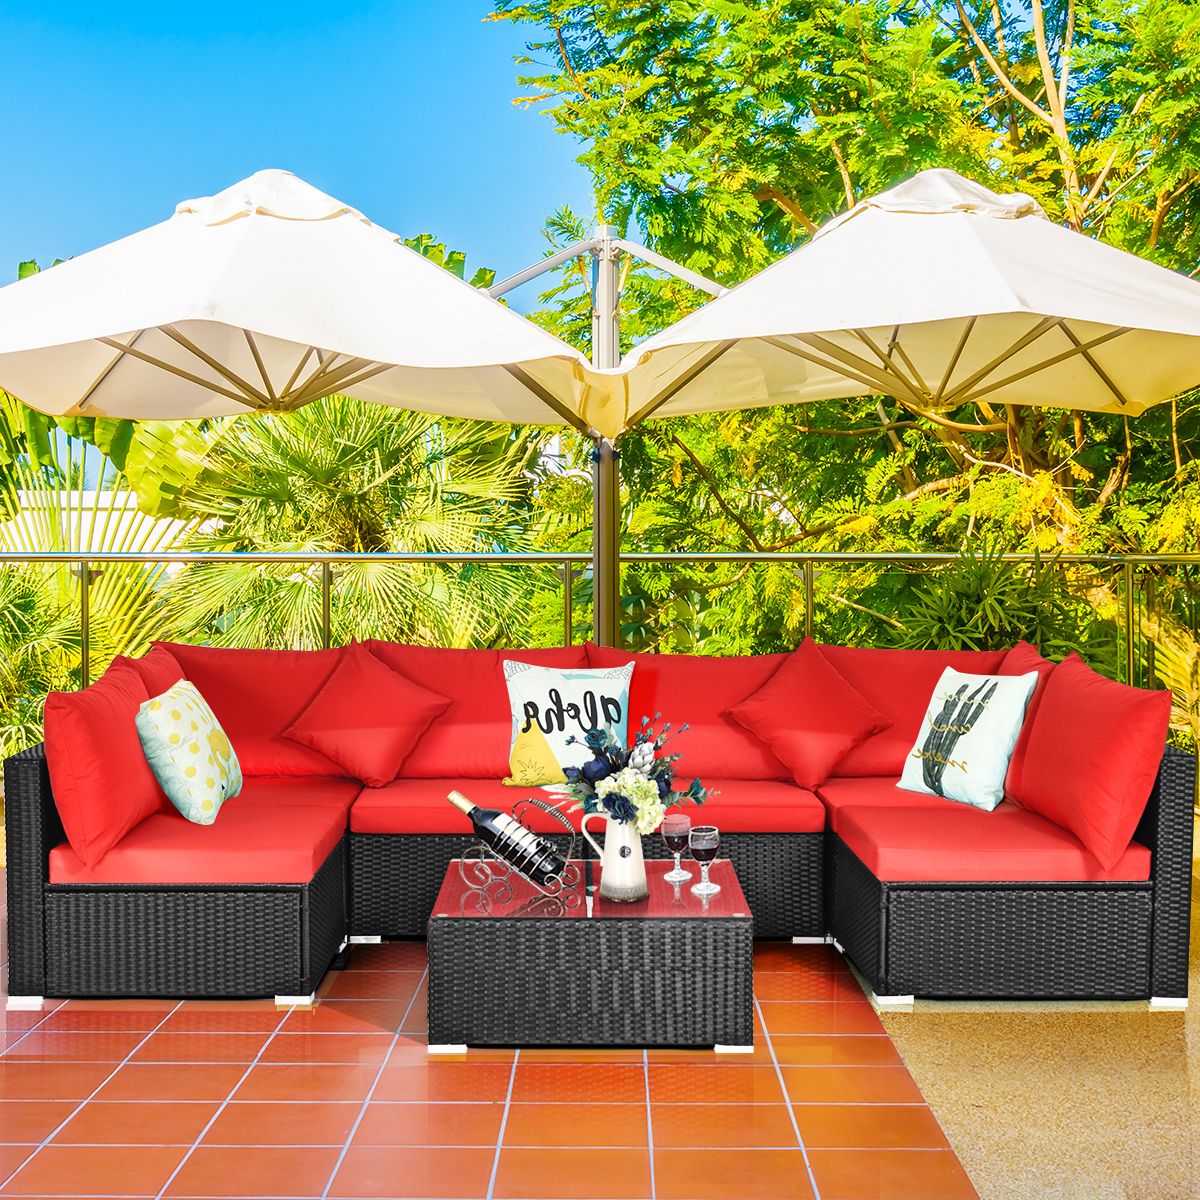 Most Recent Outdoor Seating Sectional Patio Sets With Regard To Costway 7pcs Patio Rattan Sofa Set Sectional Conversation Furniture Set (View 10 of 15)